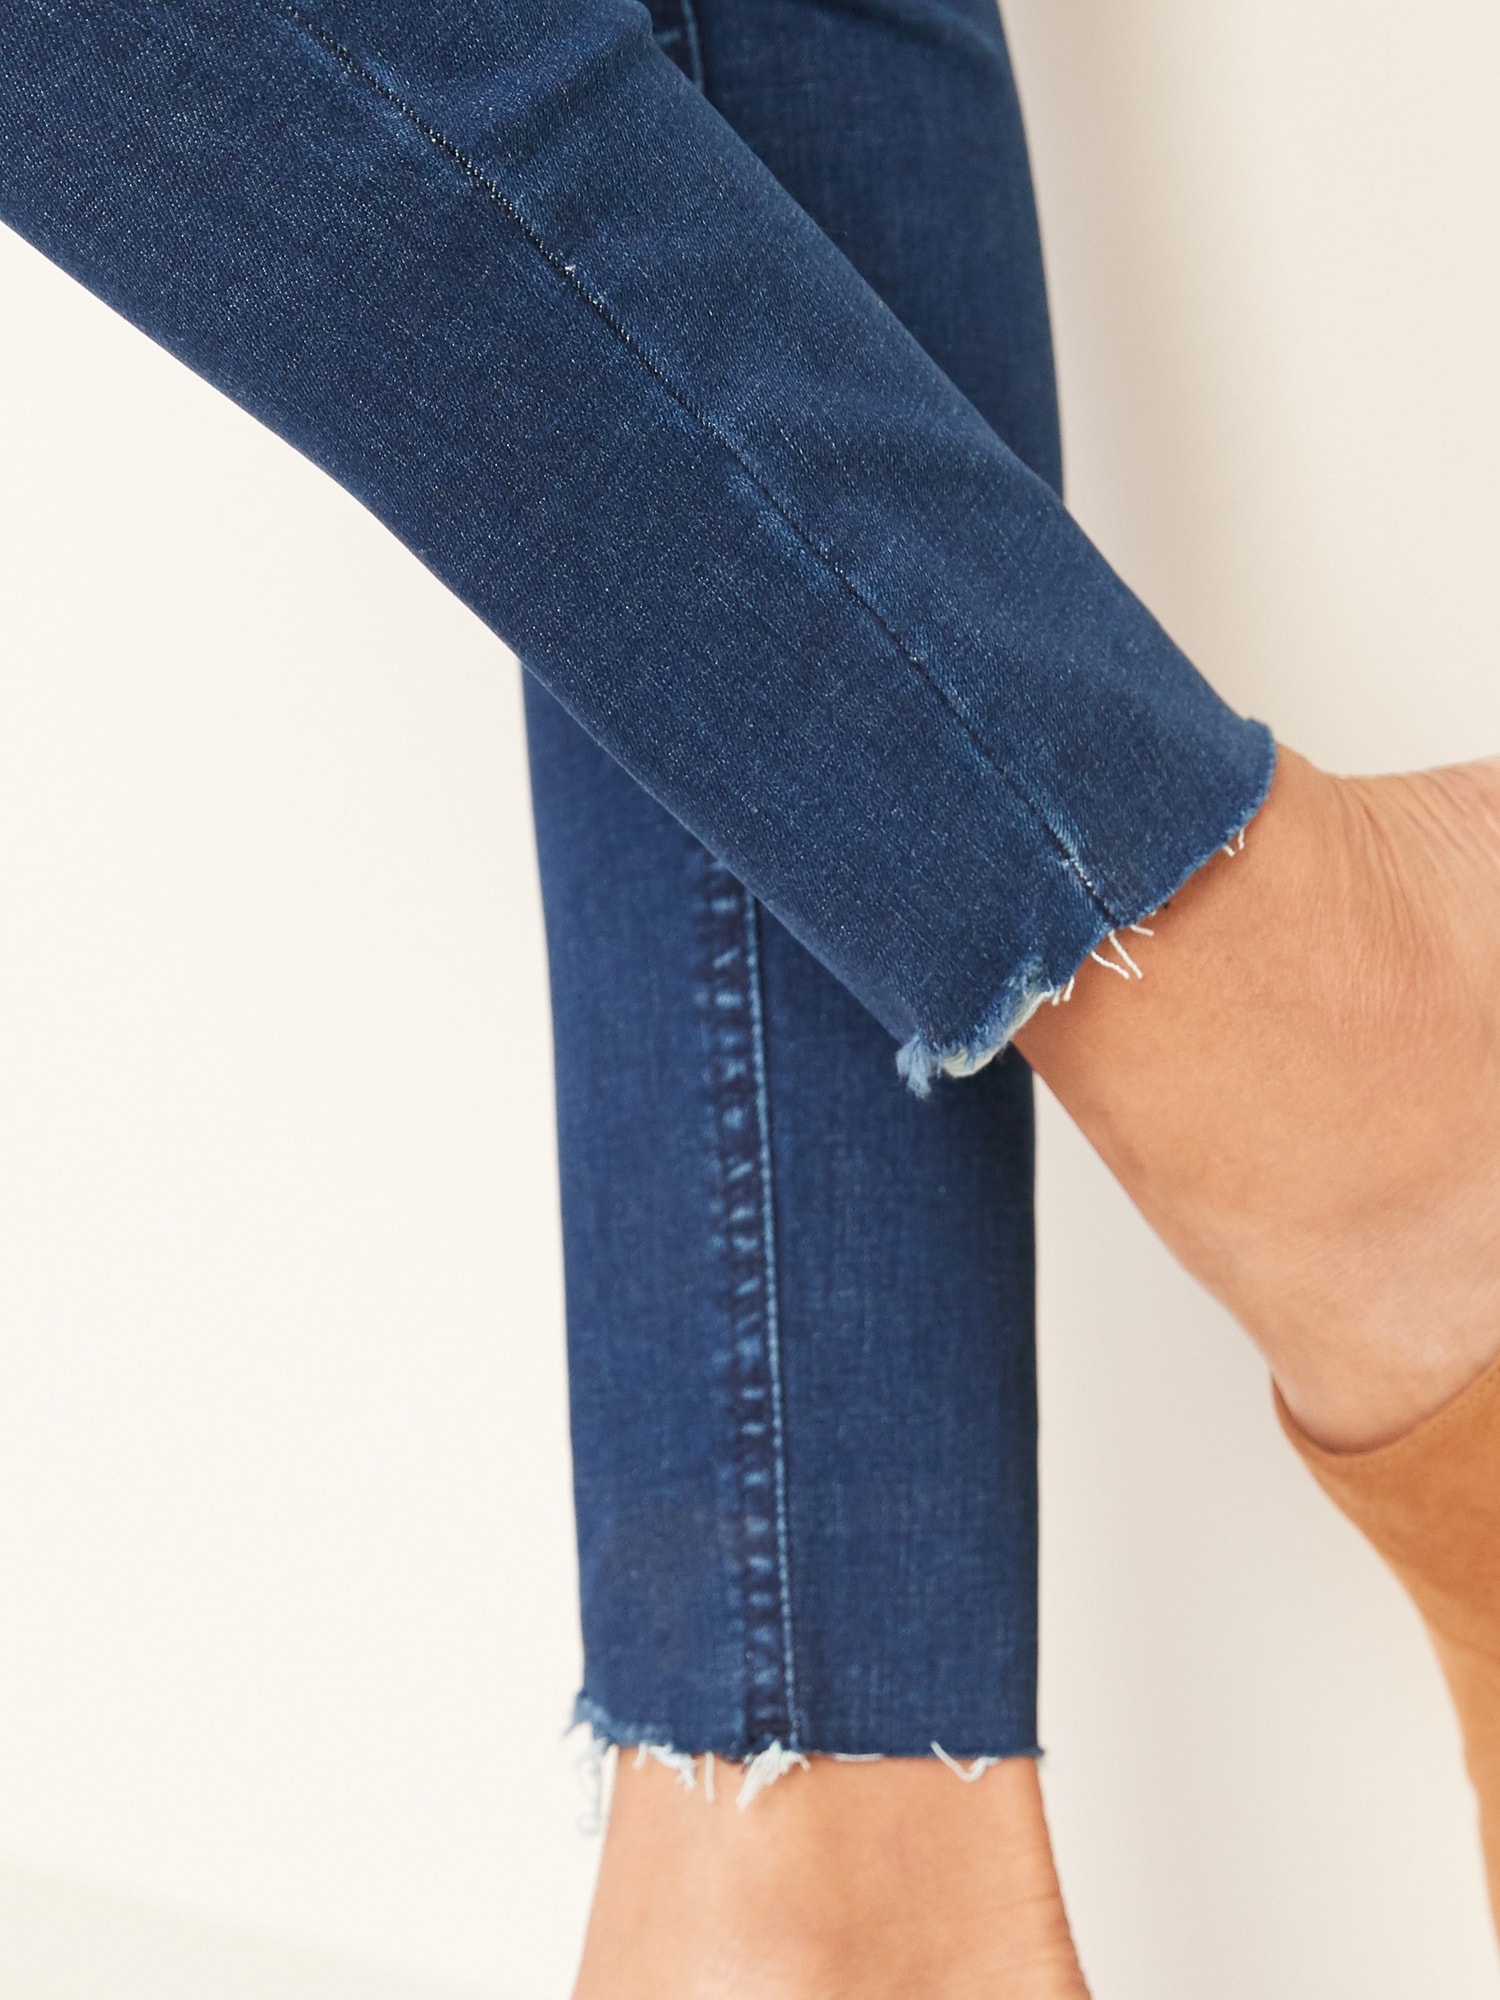 old navy extra long jeans